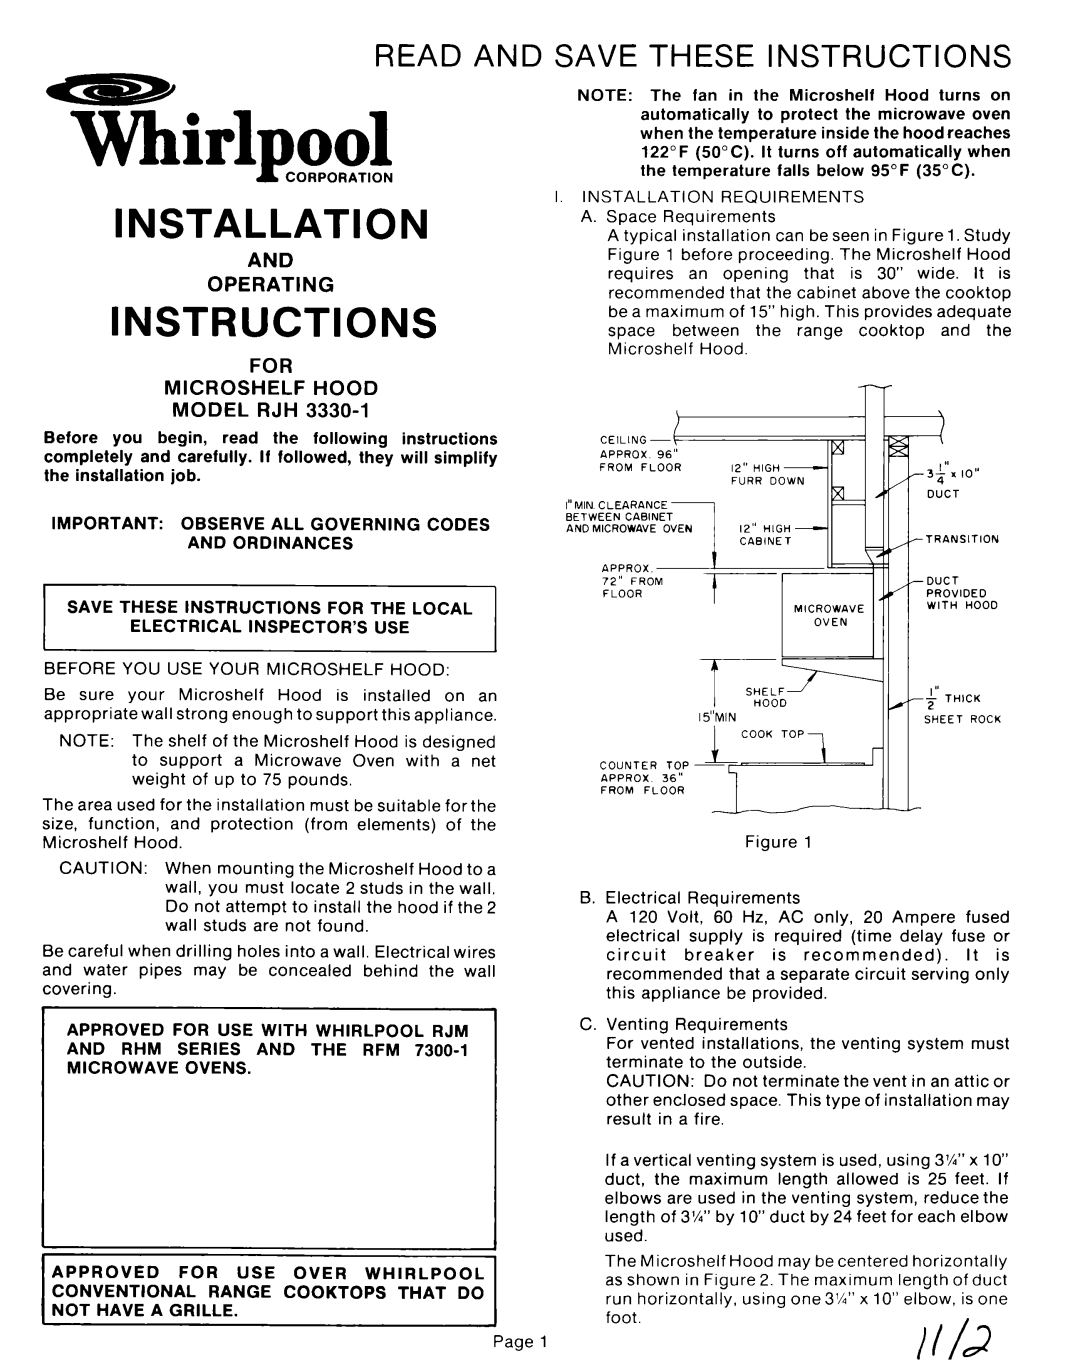 Whirlpool RJH 3330-1 operating instructions YLrlmml, Installation, 3‘IO”, Read And Save These Instructions 